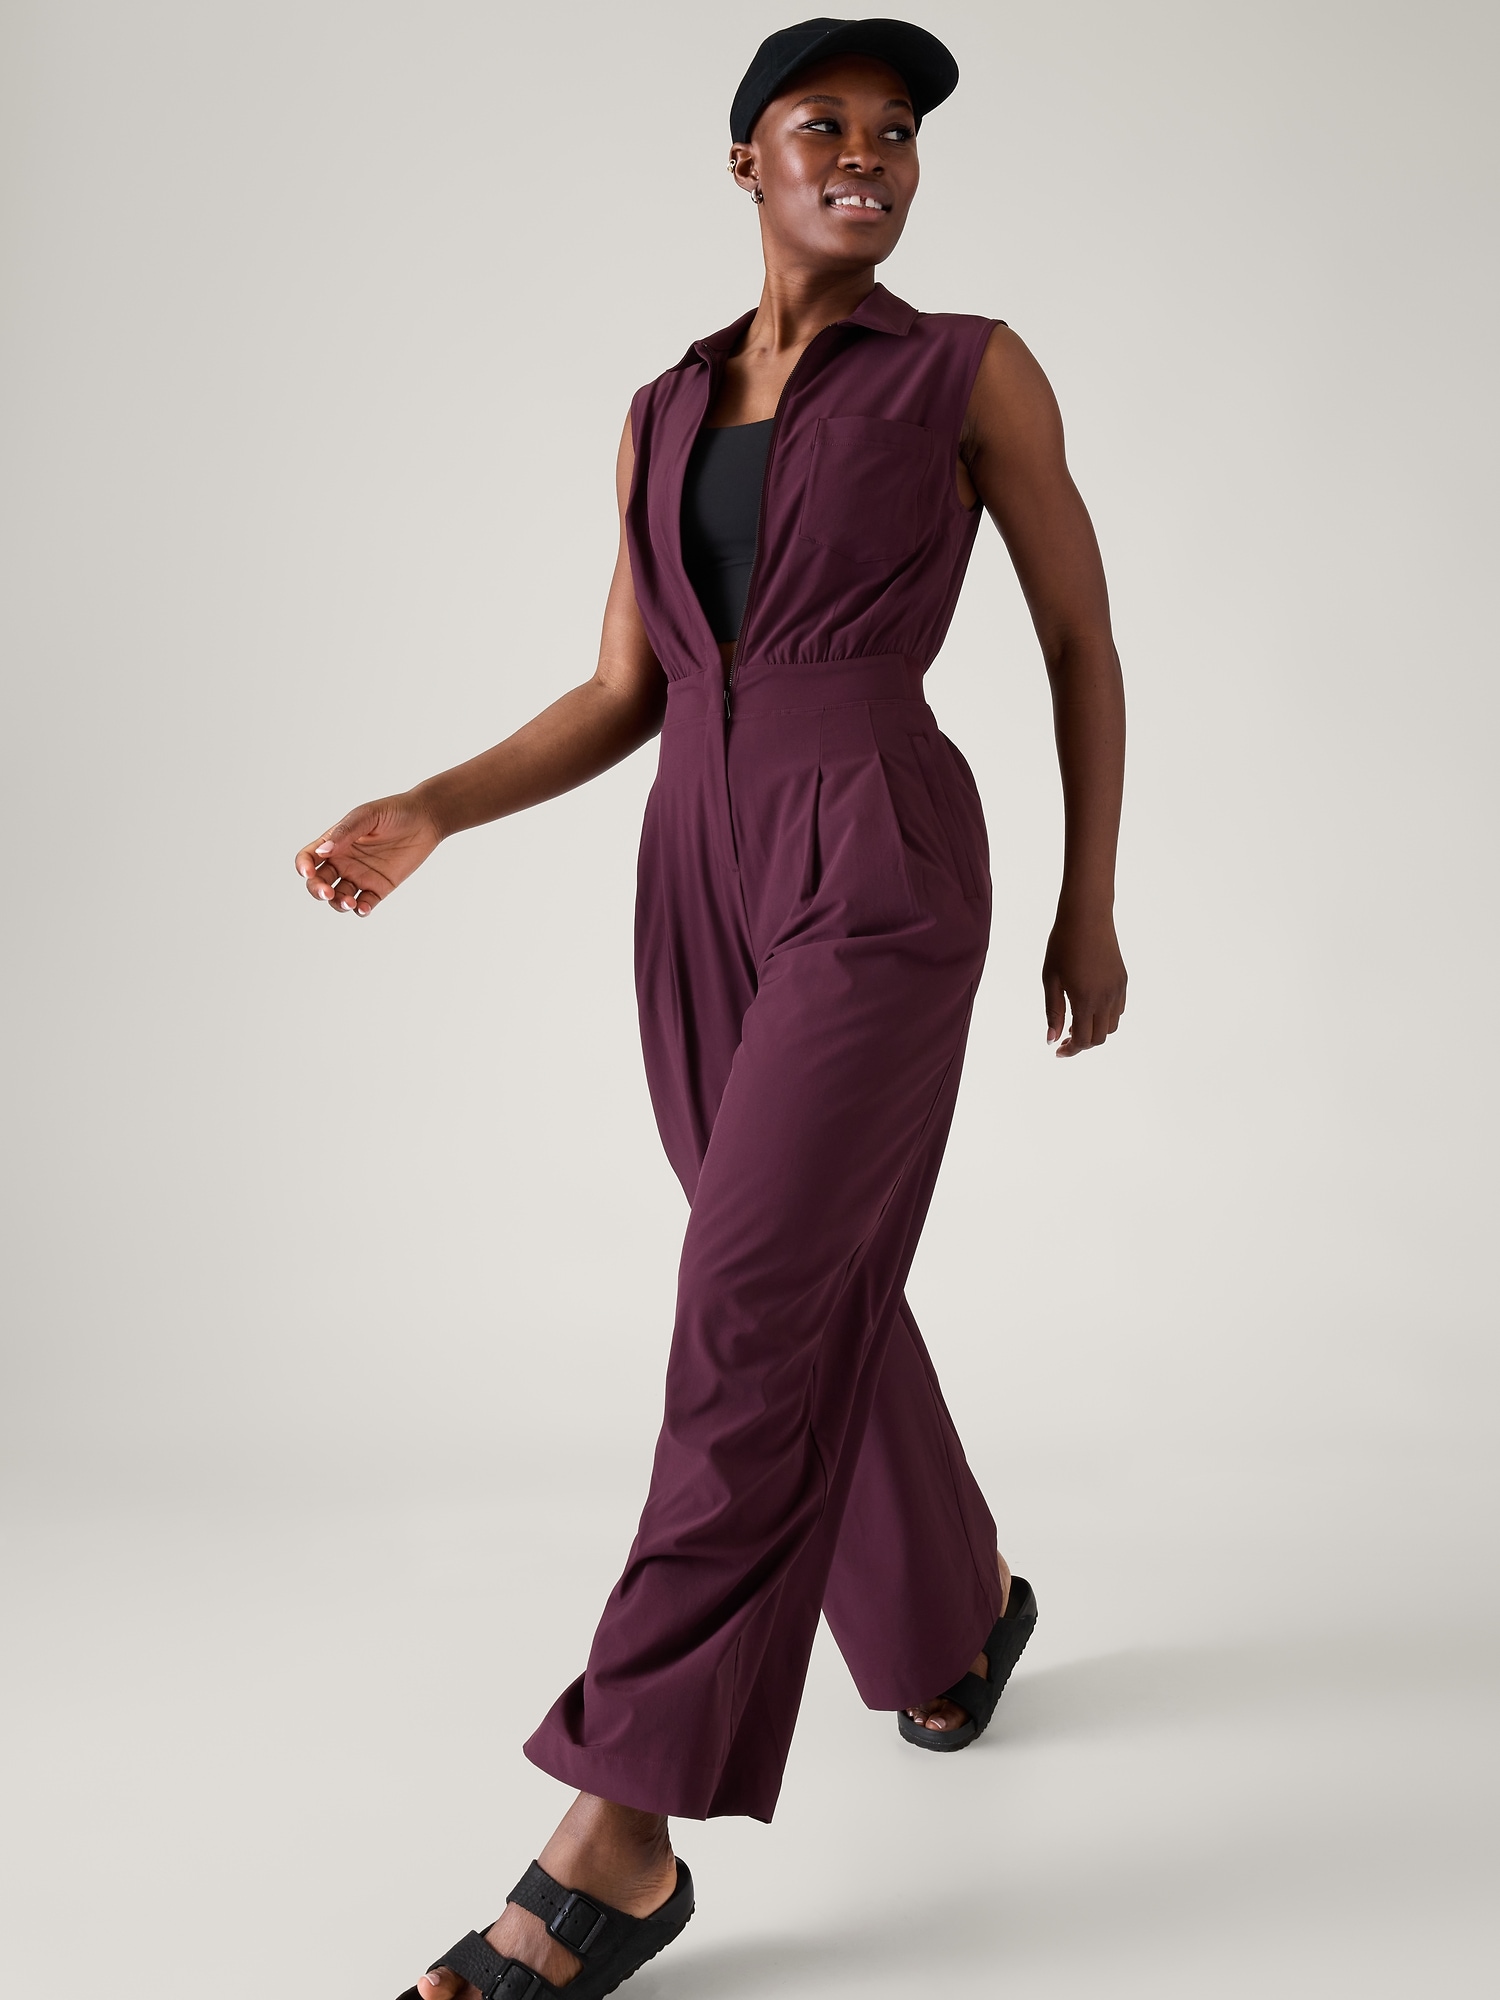 Athleta Brooklyn Heights Wide Leg Jumpsuit In Spiced Cabernet